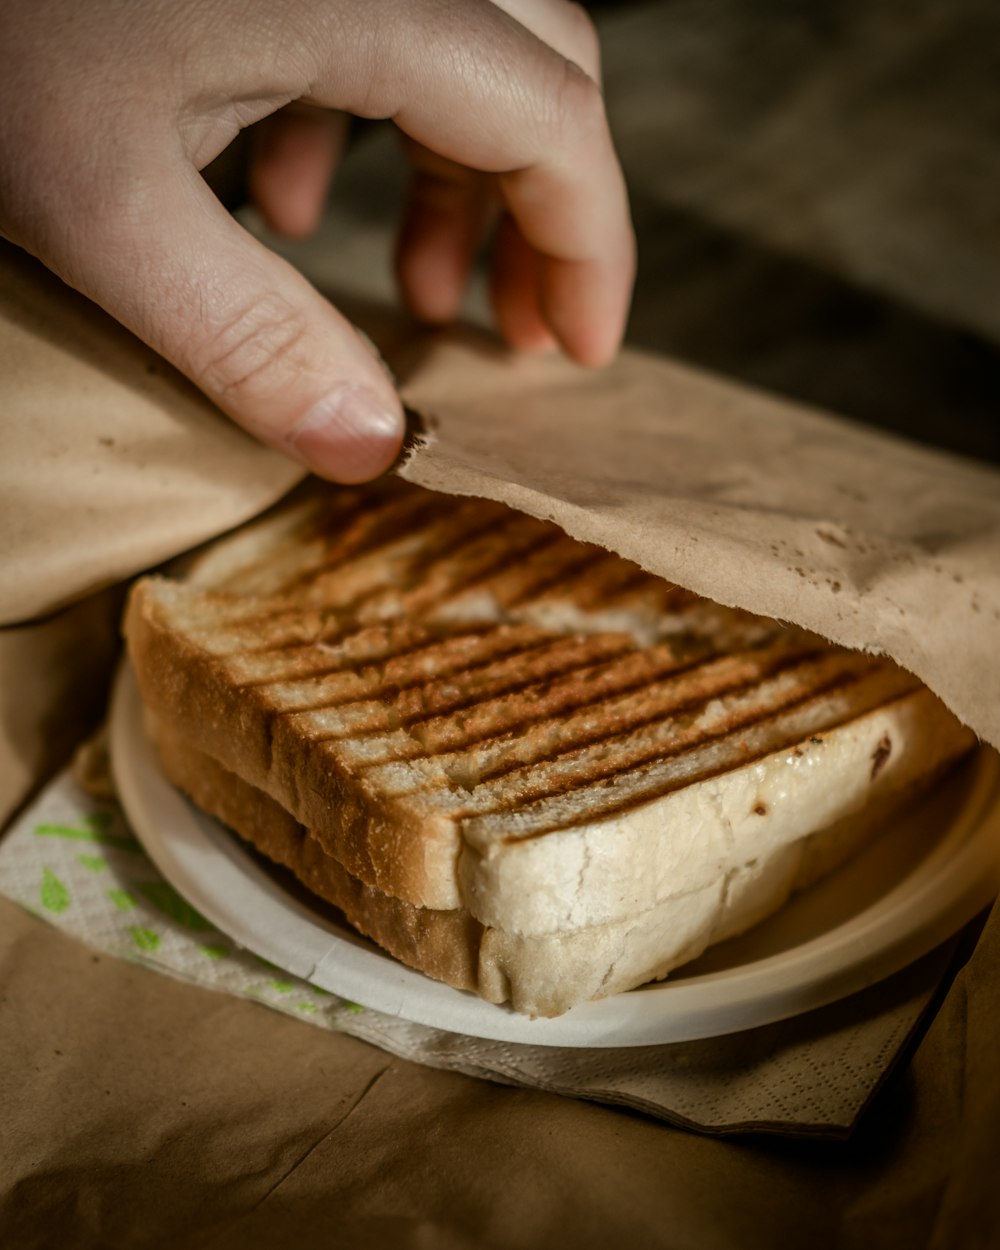 a sandwich on a plate being held by a person